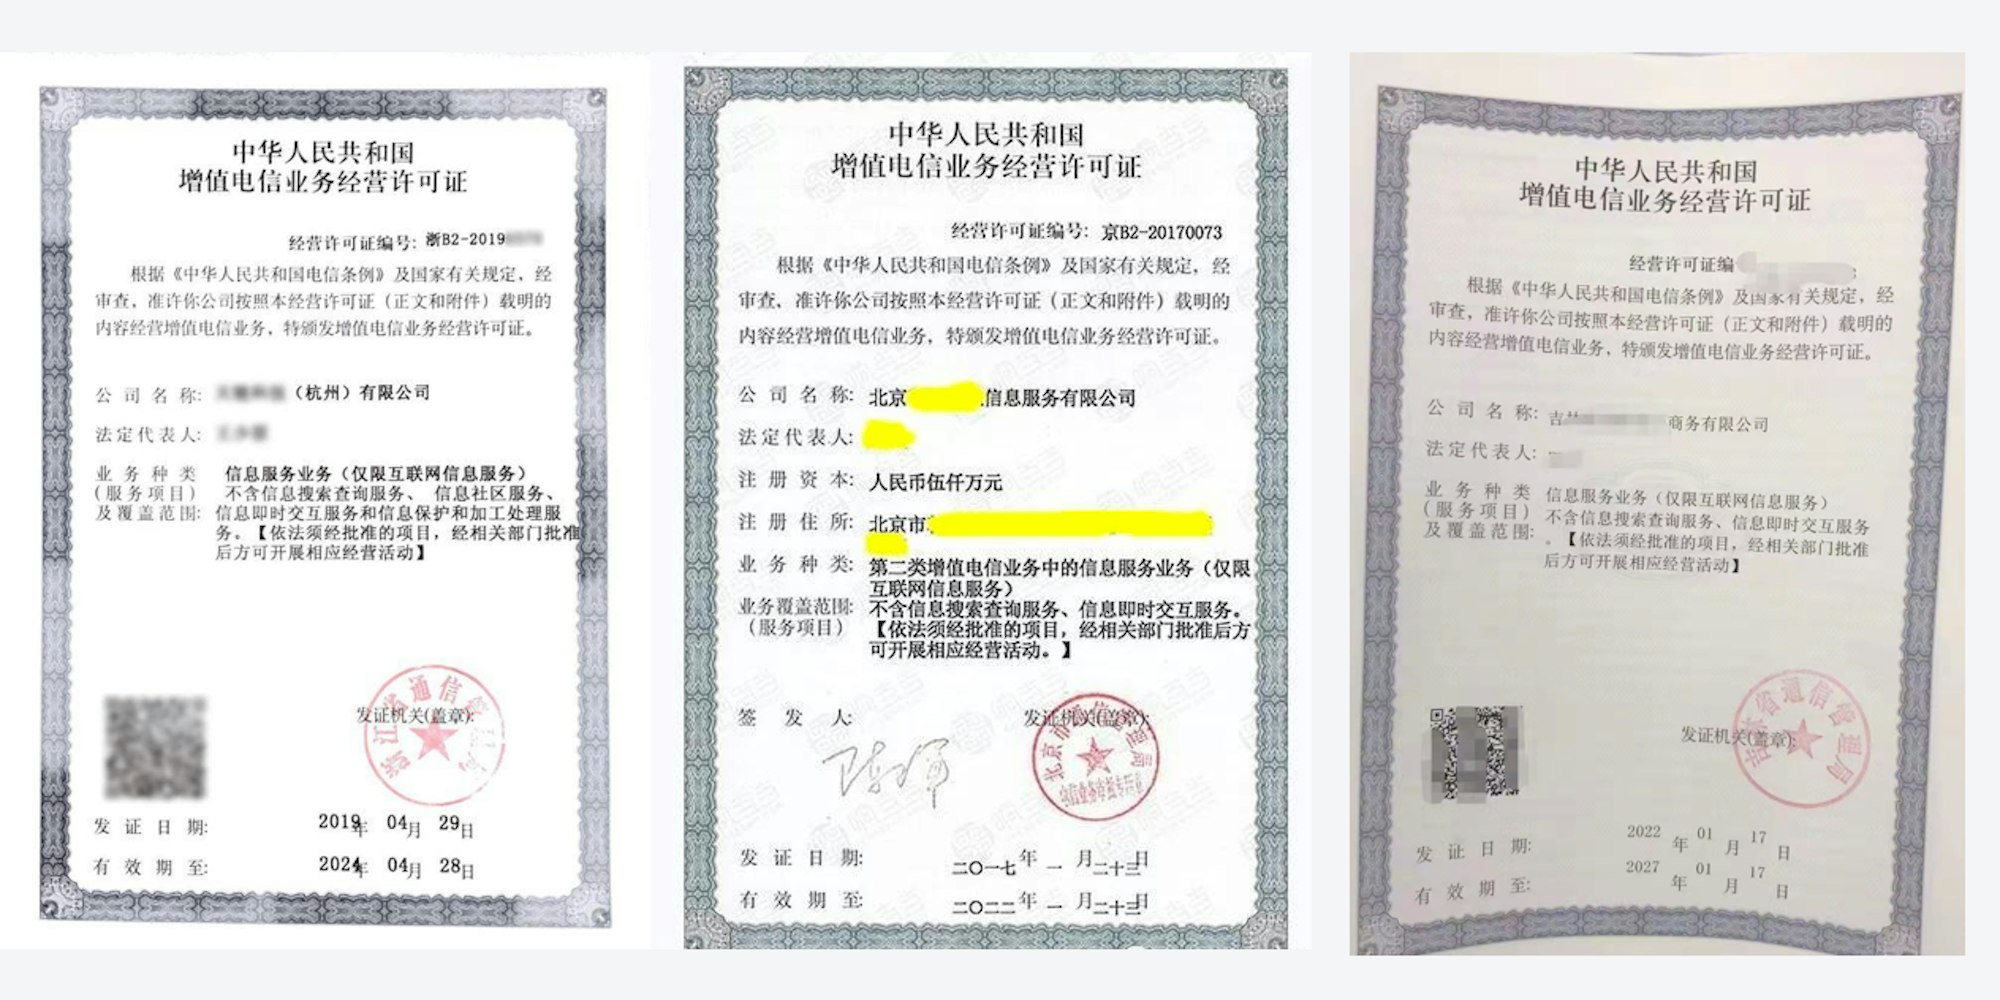 Example of ICP License certificate